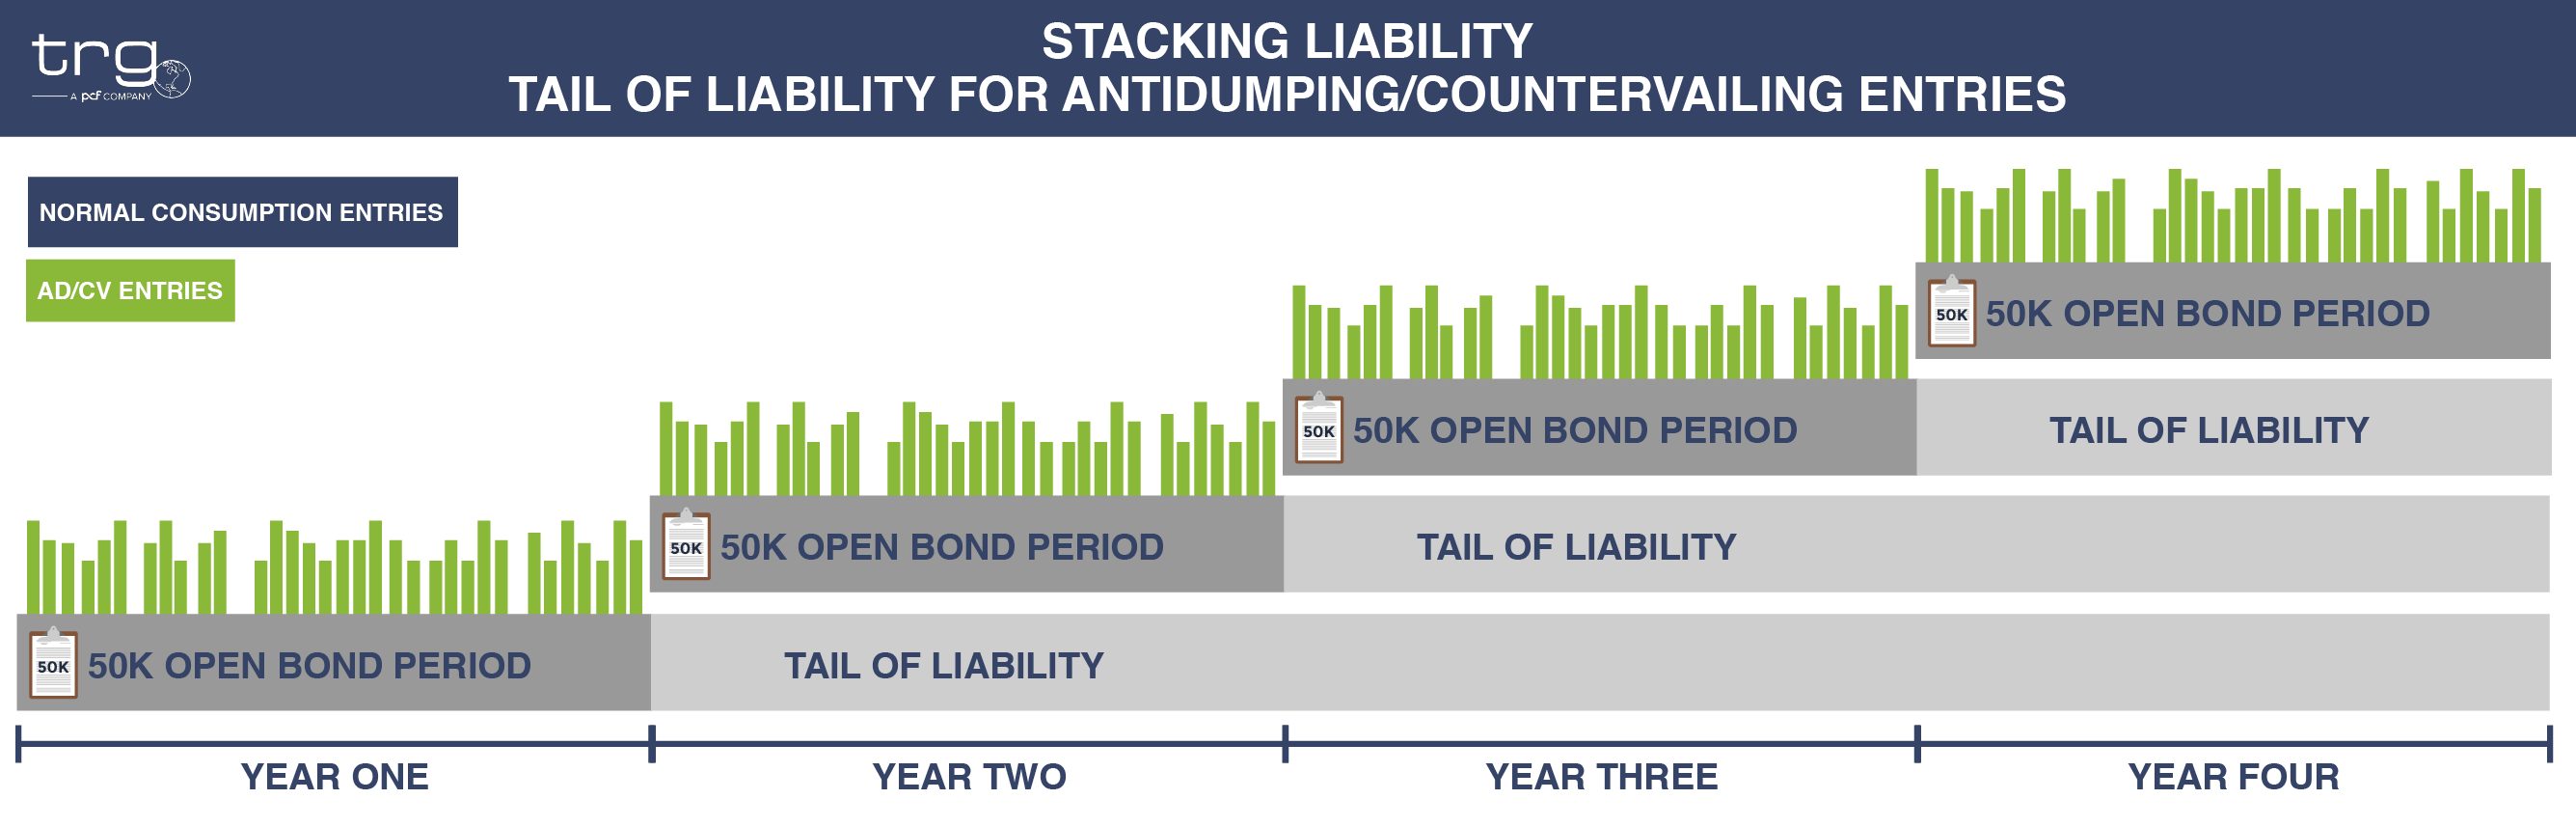 A graphic showing the tailing of liability when an importer makes only antidumping and countervailing entries into the United States.